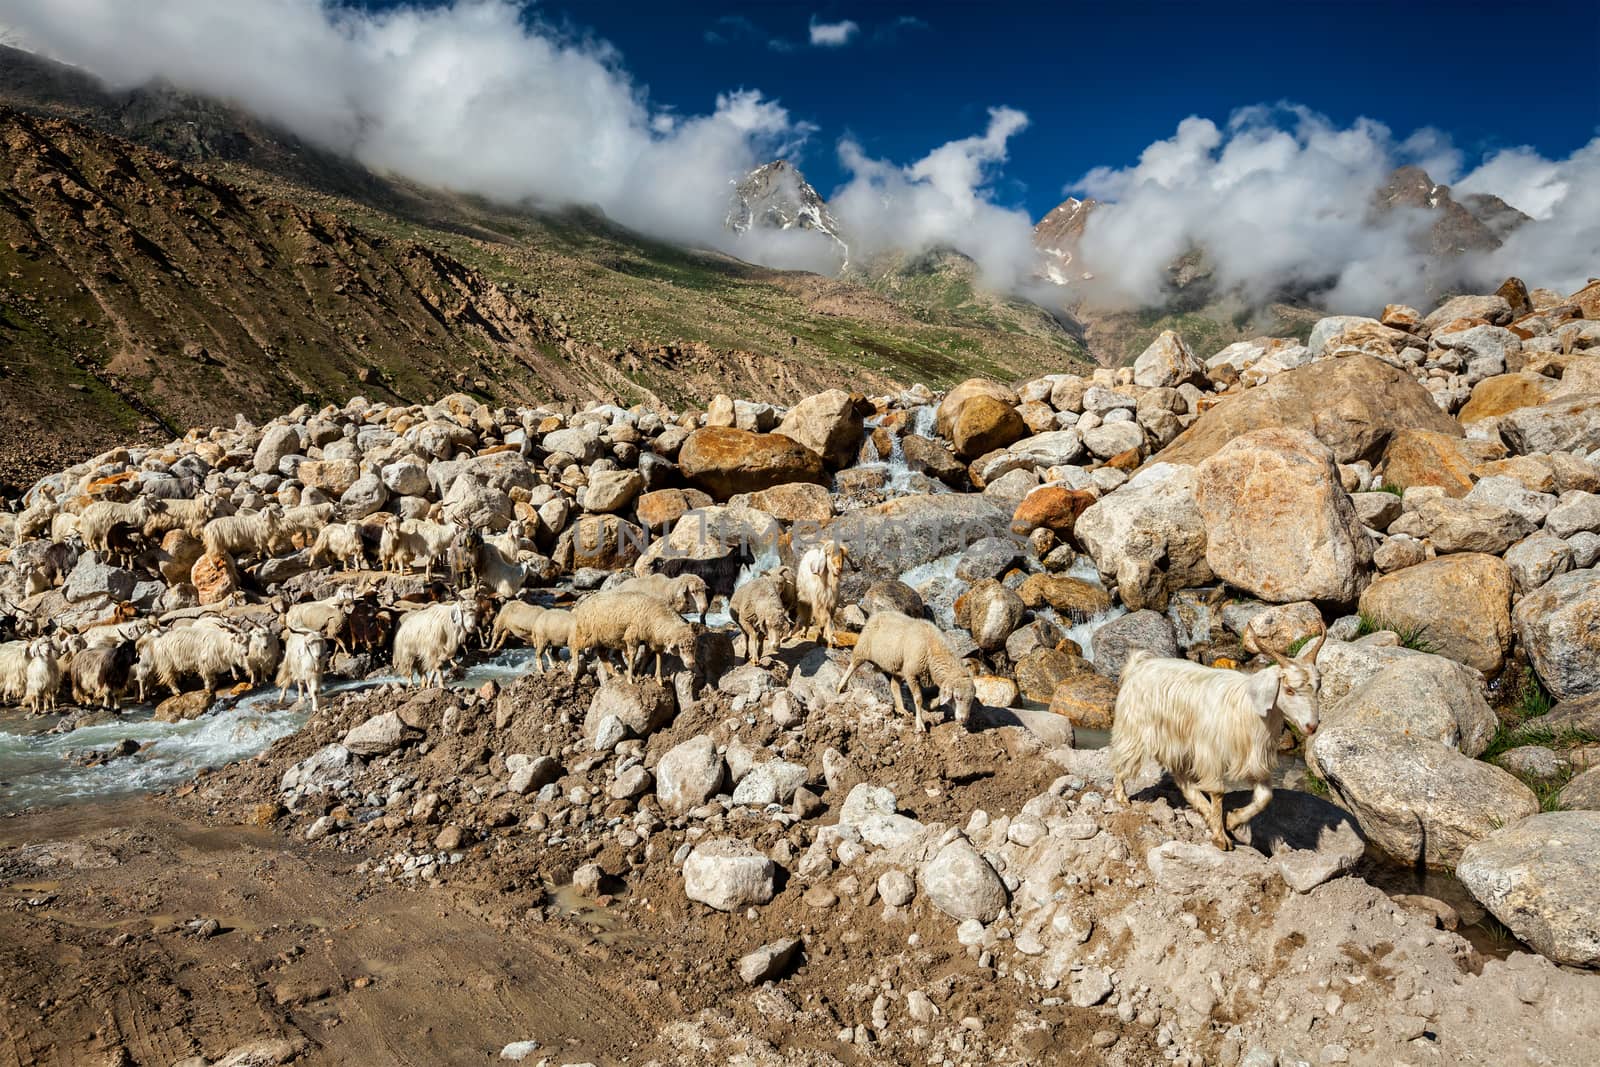 Herd of Pashmina sheep and goats crossing the stream in Himalayas. Lahaul Valley, Himachal Pradesh, India